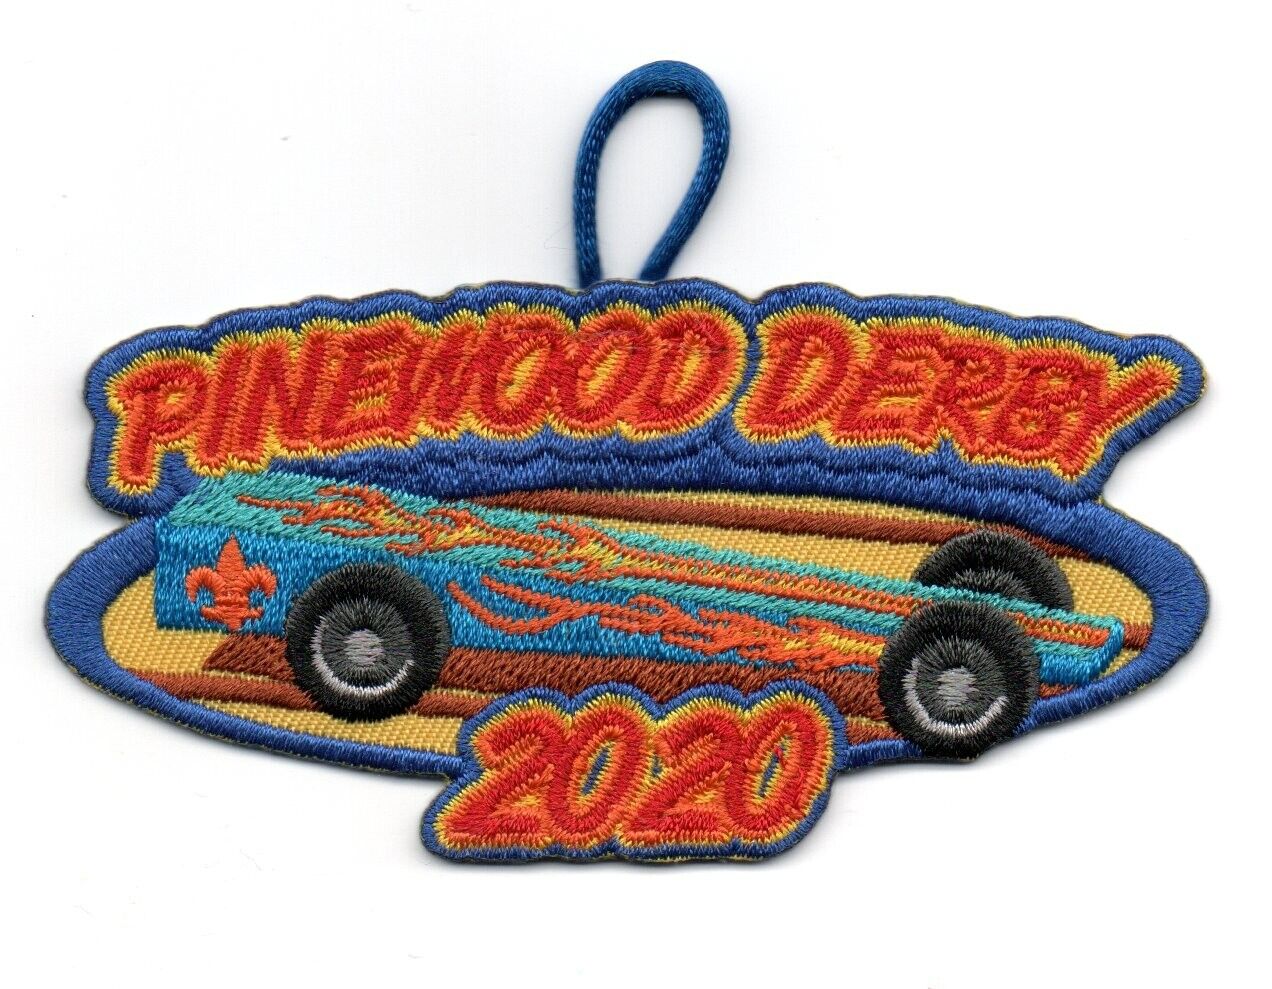 Cub Scouting 2020 Pinewood Derby Participant Award Patch, Mint